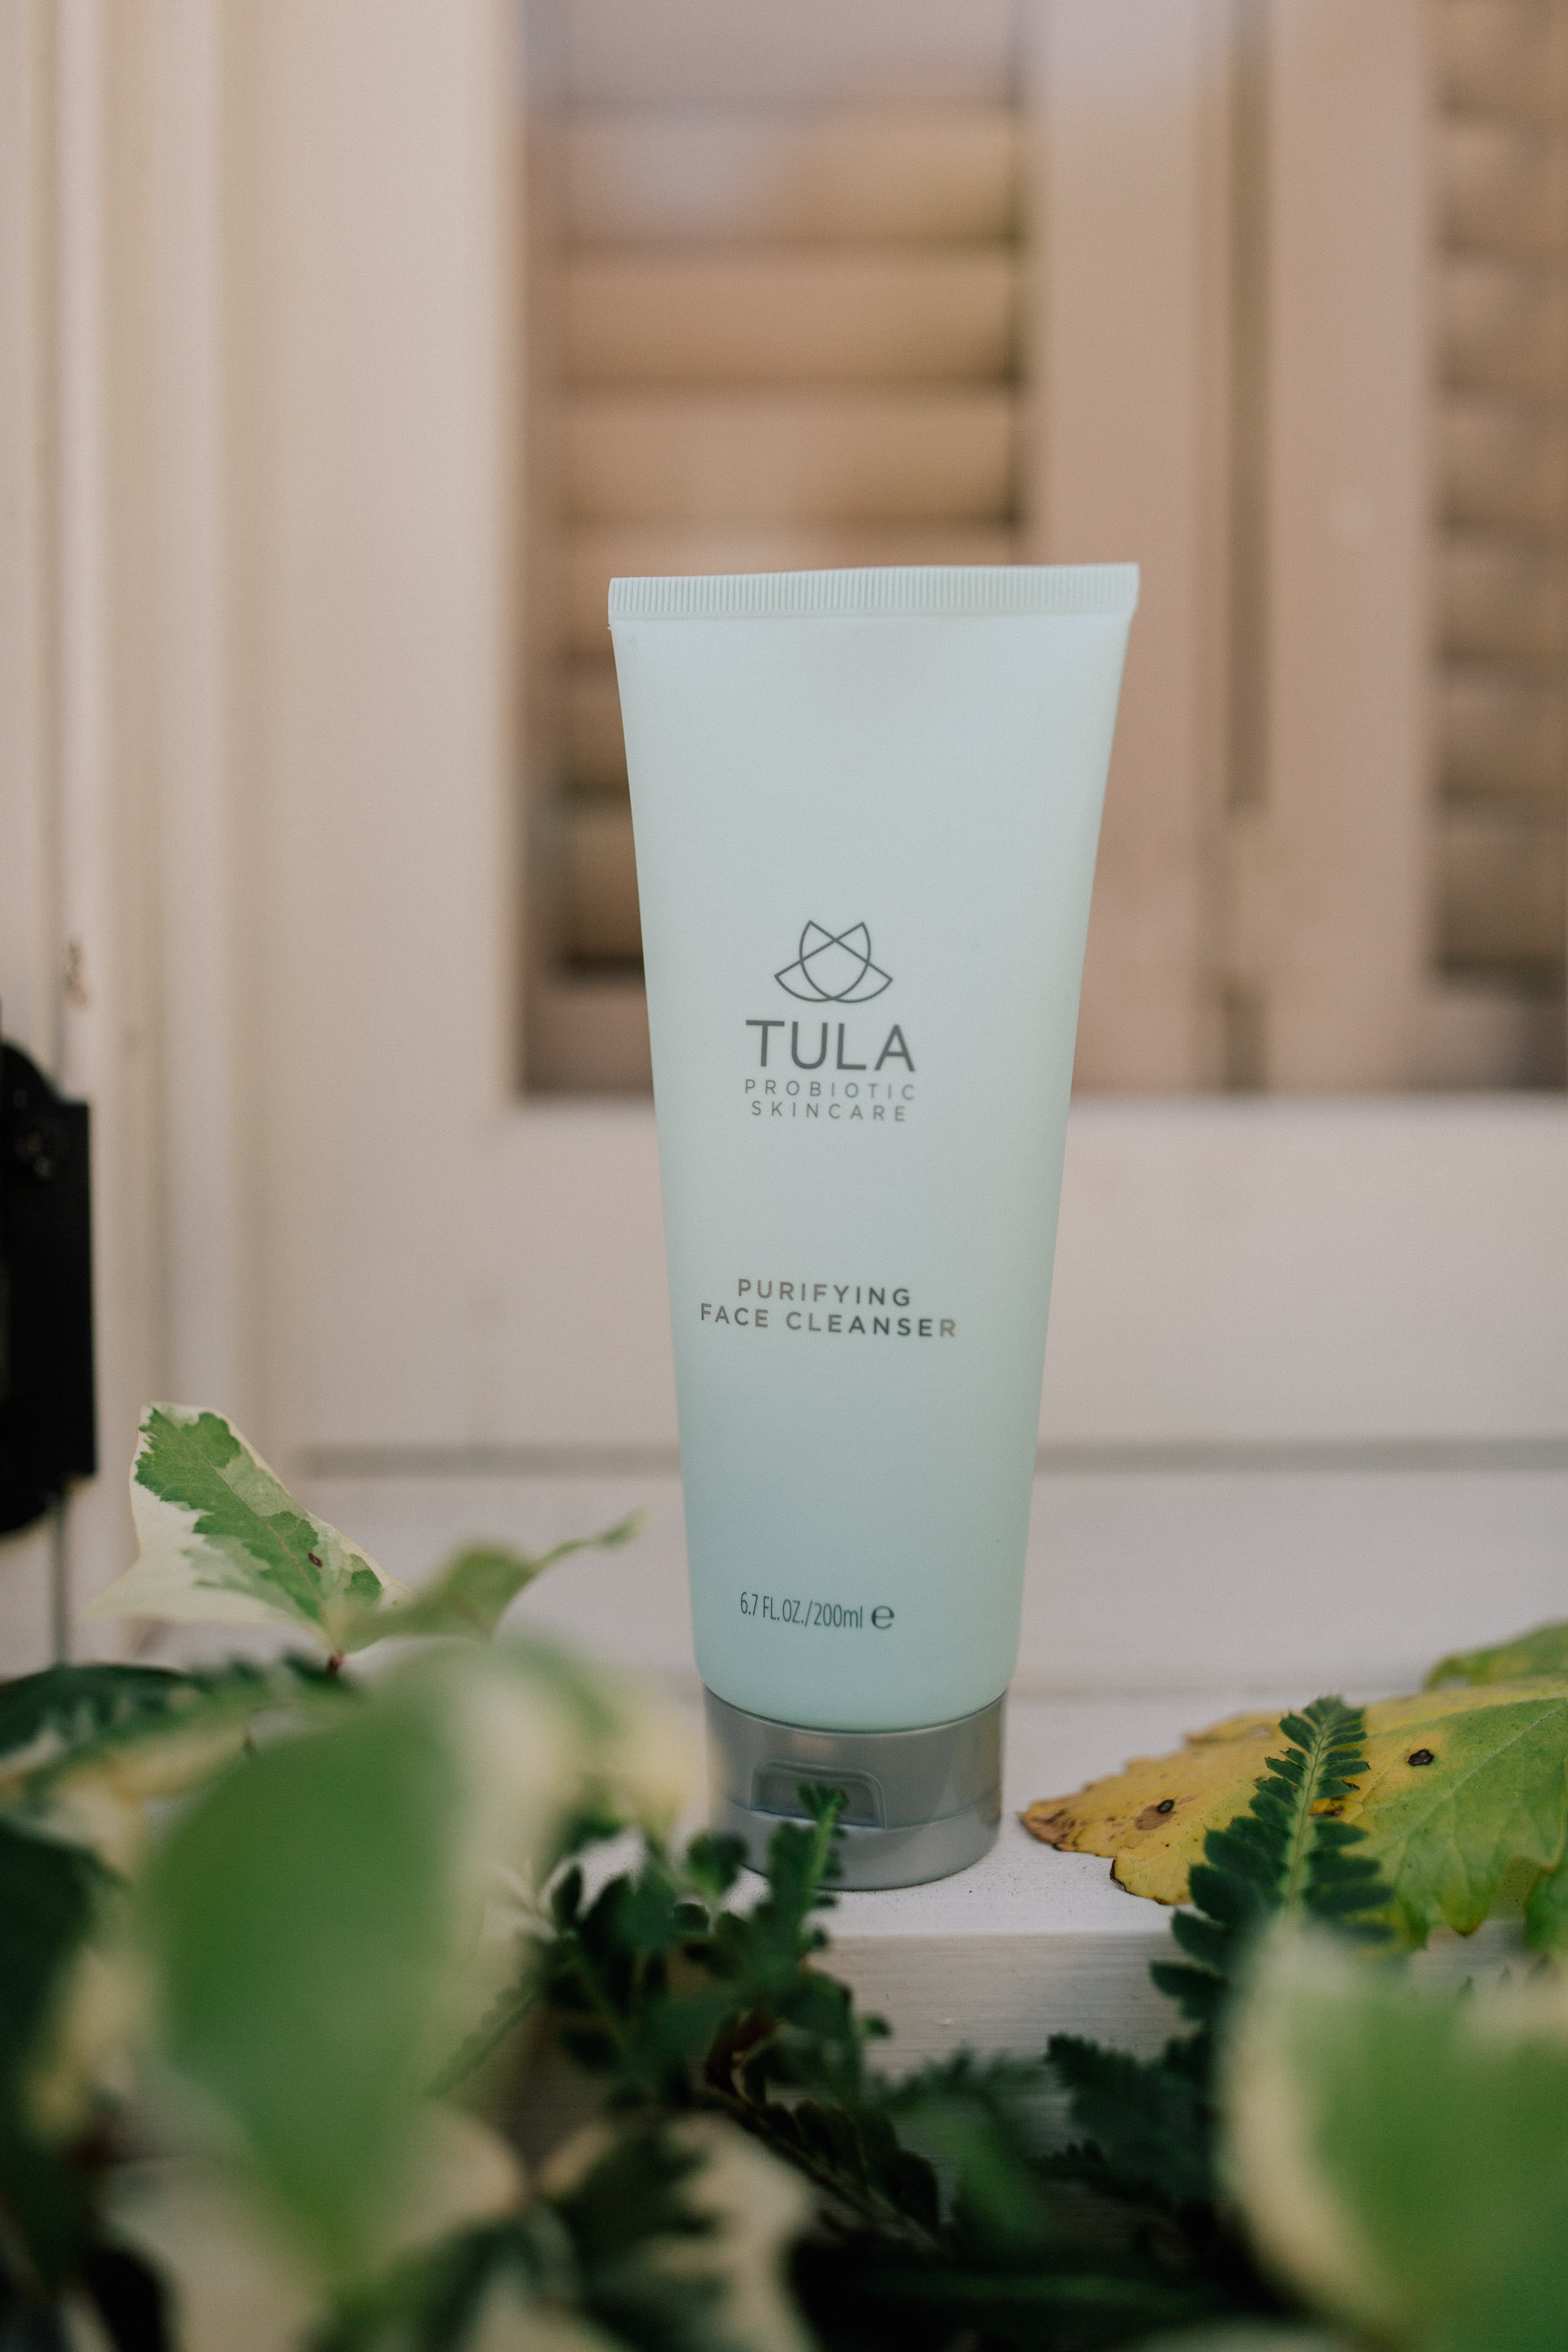 Tula Probiotic Skincare - A New Skin Solution | Kelly in the City